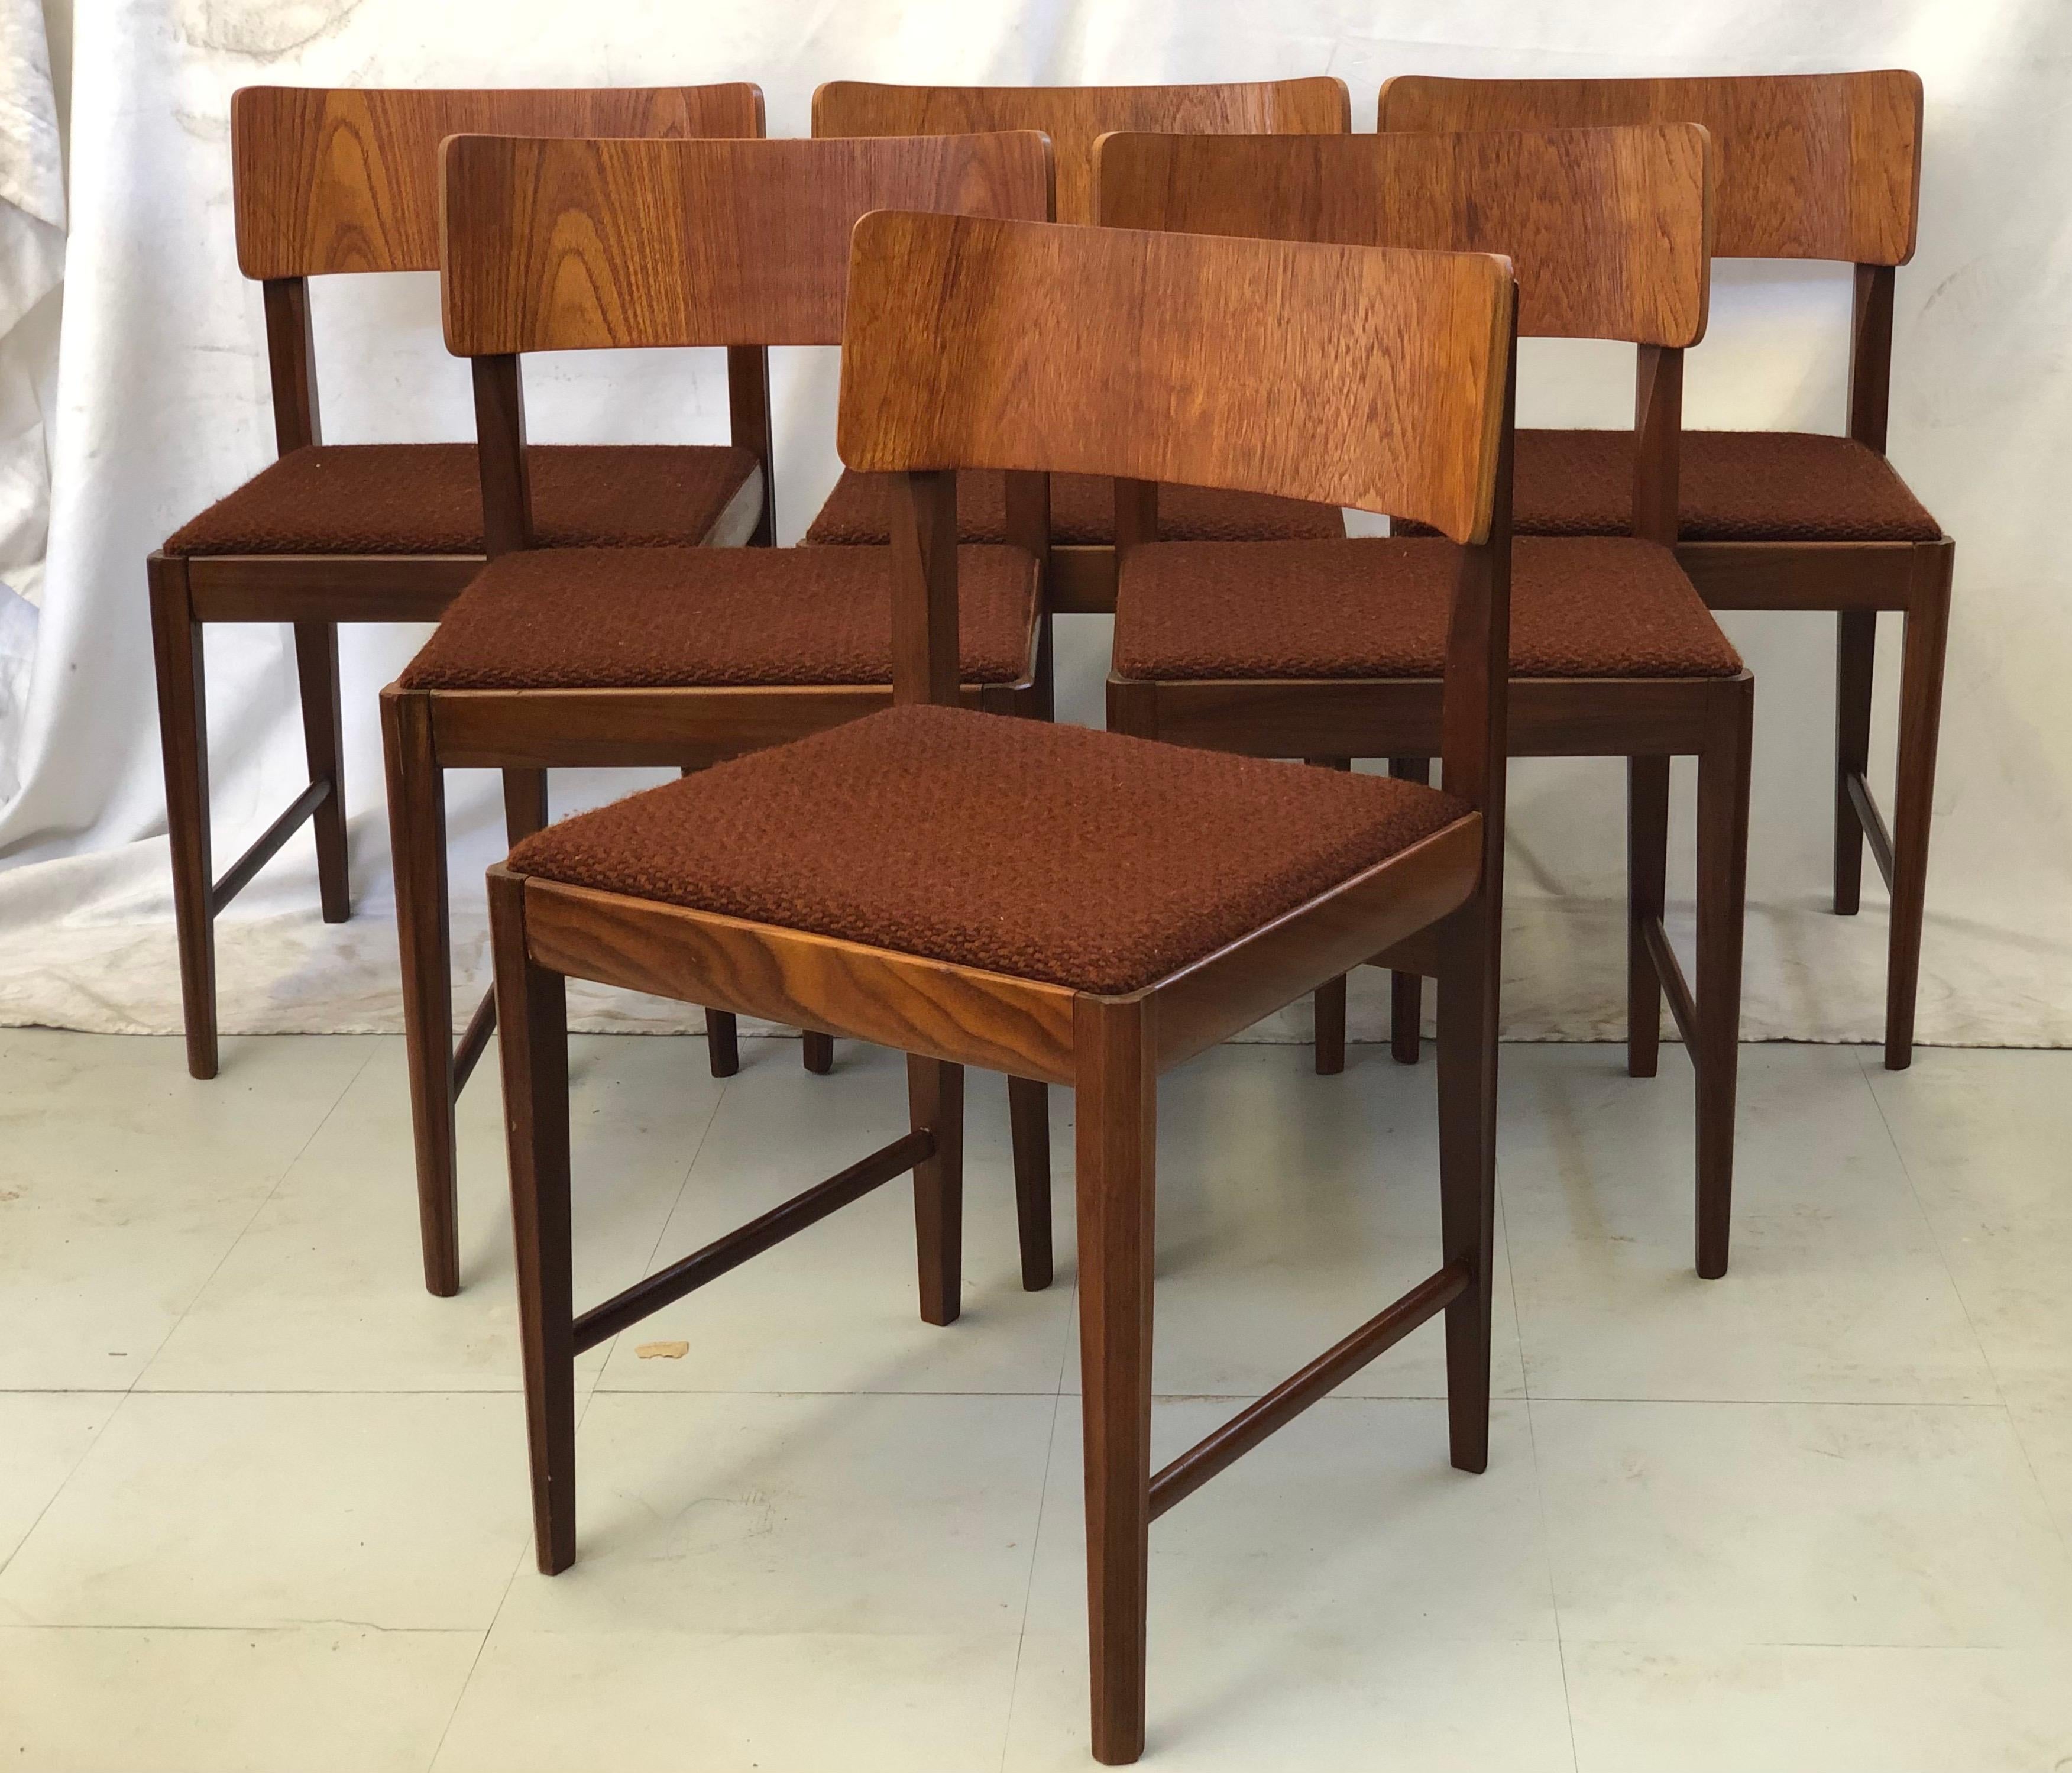 Set of Six Mid-Century Modern Danish Style walnut dining chairs, 1960s. The chairs having a bentwood backrest and gently tapering legs joined by a pair of side stretchers. The chairs have original mid-century style fabric.